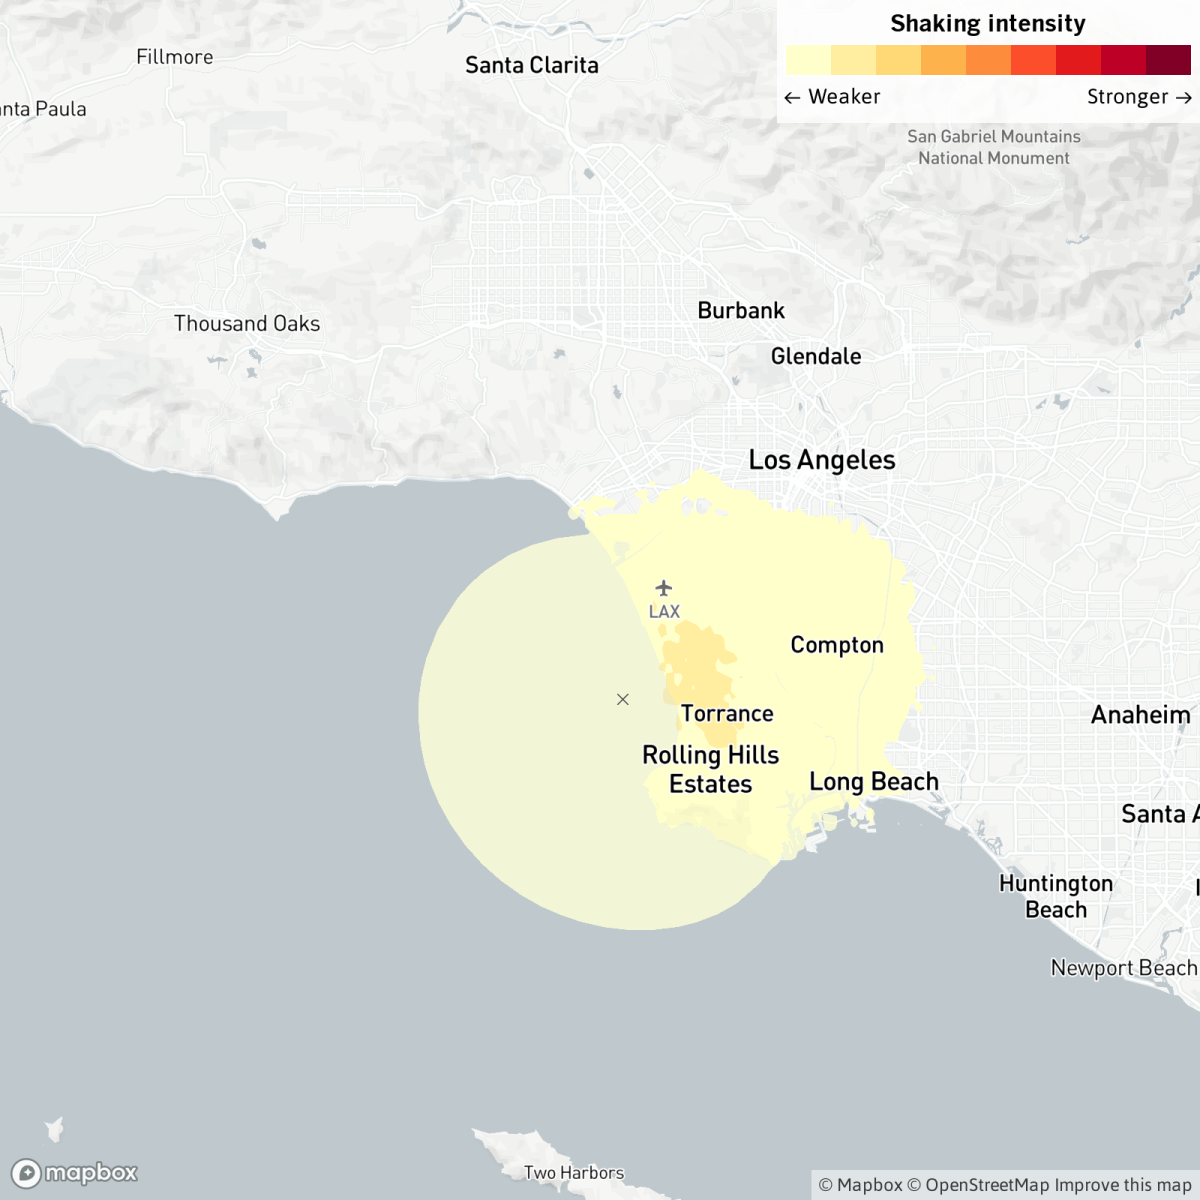 Map of Los Angeles area with earthquake epicenter off the coast and light shaking through South Bay, Westside and South L.A.